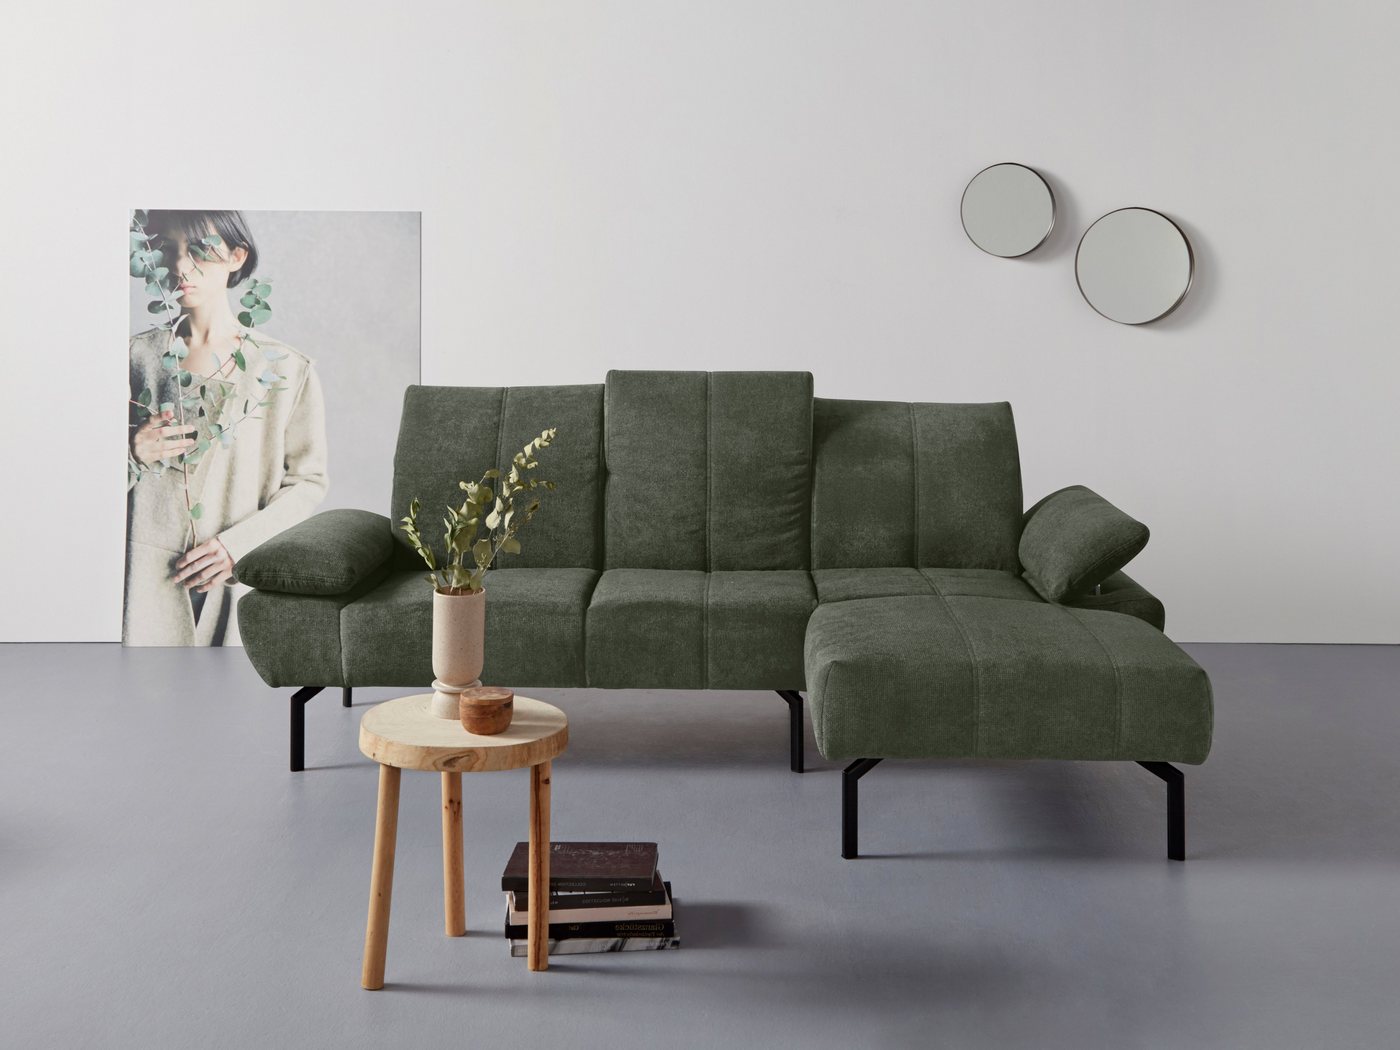 Places of Style Ecksofa Ryedal L-Form, wahlweise mit oder ohne Sockel in Wildeiche-Optik von Places of Style